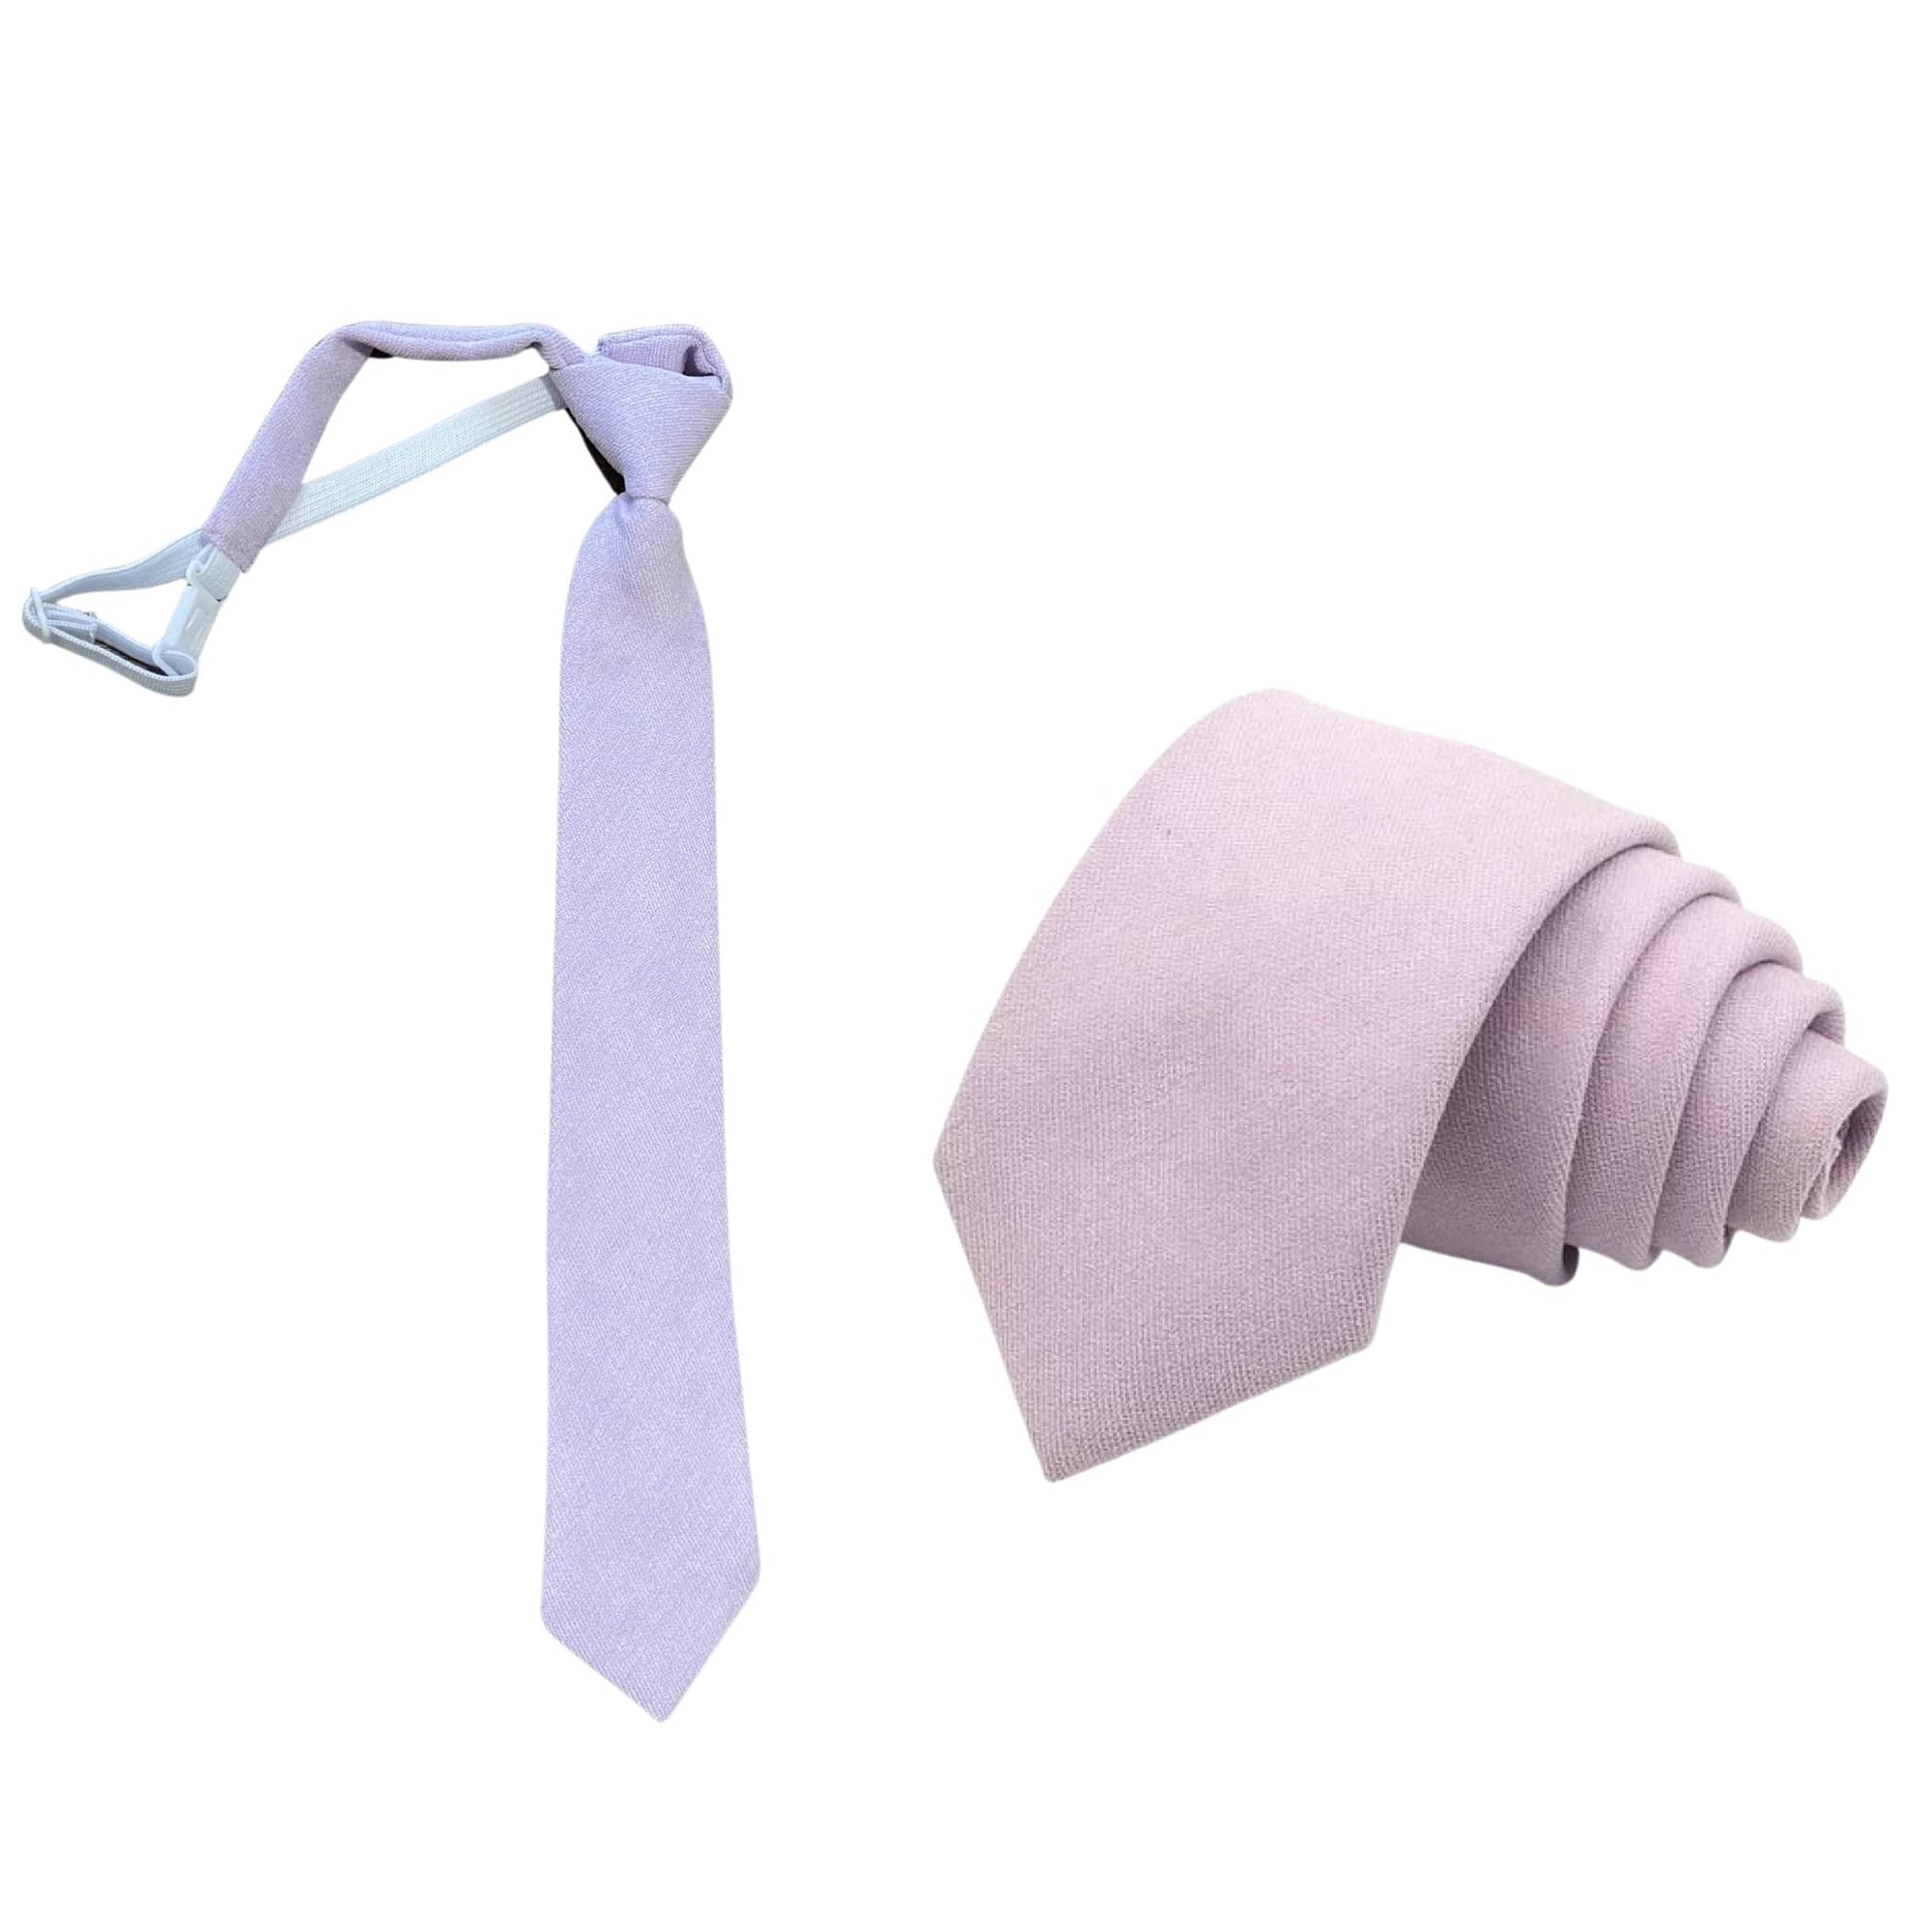 Purple Boys Floral Clip On Tie 2.3 for kids toddler child Mytieshop - REMI-Purple Boys Floral Clip On Tie Material: Suede Color: Purple Approx Size: Max width: 6.5 cm / 2.36 inches Length: 37 Cm / 14.56 Inches Have your little one looking sharp with this REMI Purple Kids and Toddlers Floral Clip On Tie. This tie is specifically designed for children ages 3-8. It's made with 100% suede and is 2.3" wide. The beautiful purple color is perfect for any occasion, whether it's a wedding, family reunion